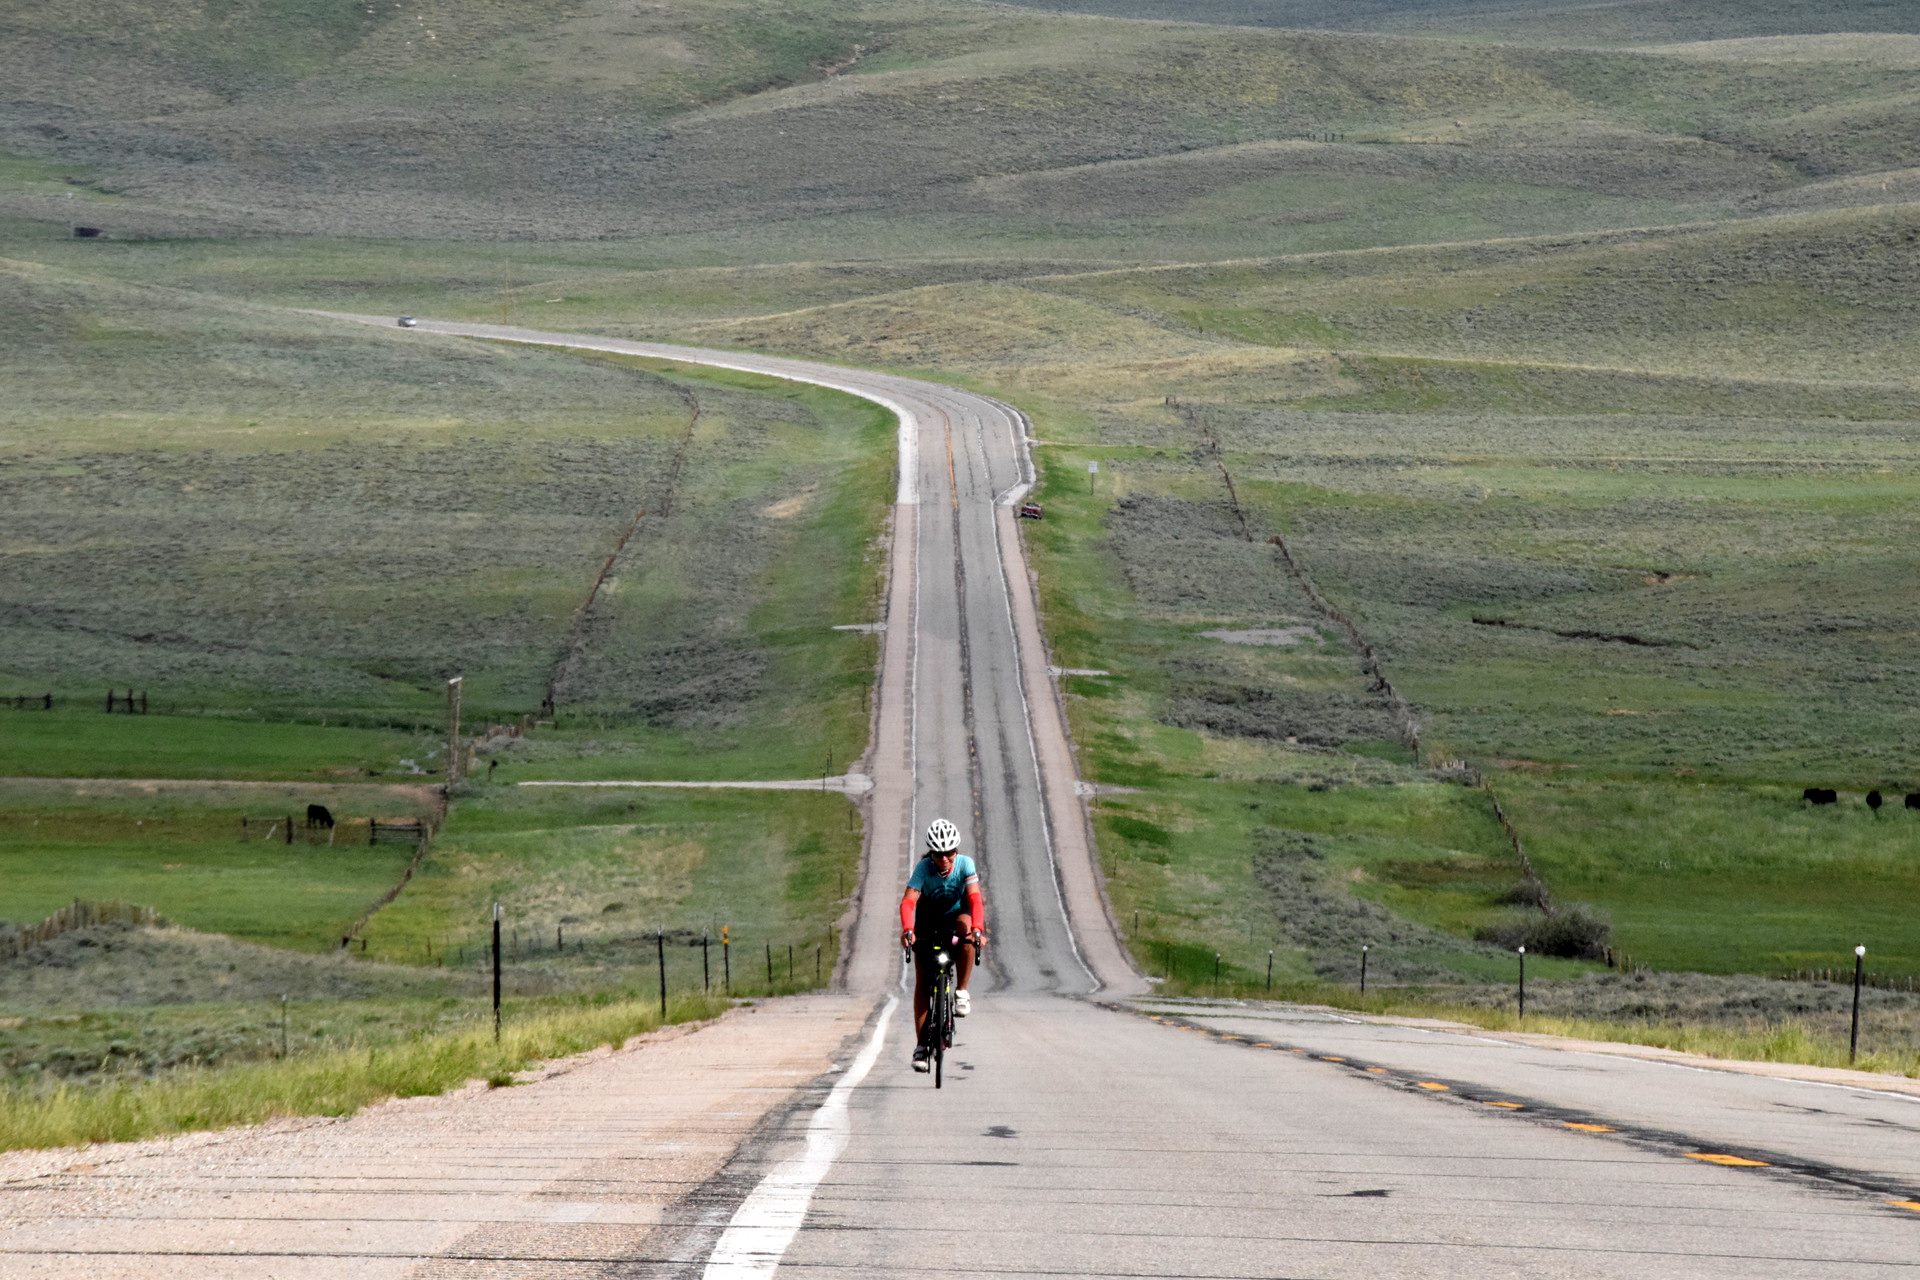 Janie Hayes rides a bike near the Colorado-Wyoming border in the 2016 Trans America Bike Race. Photo credit: Anthony Dryer.